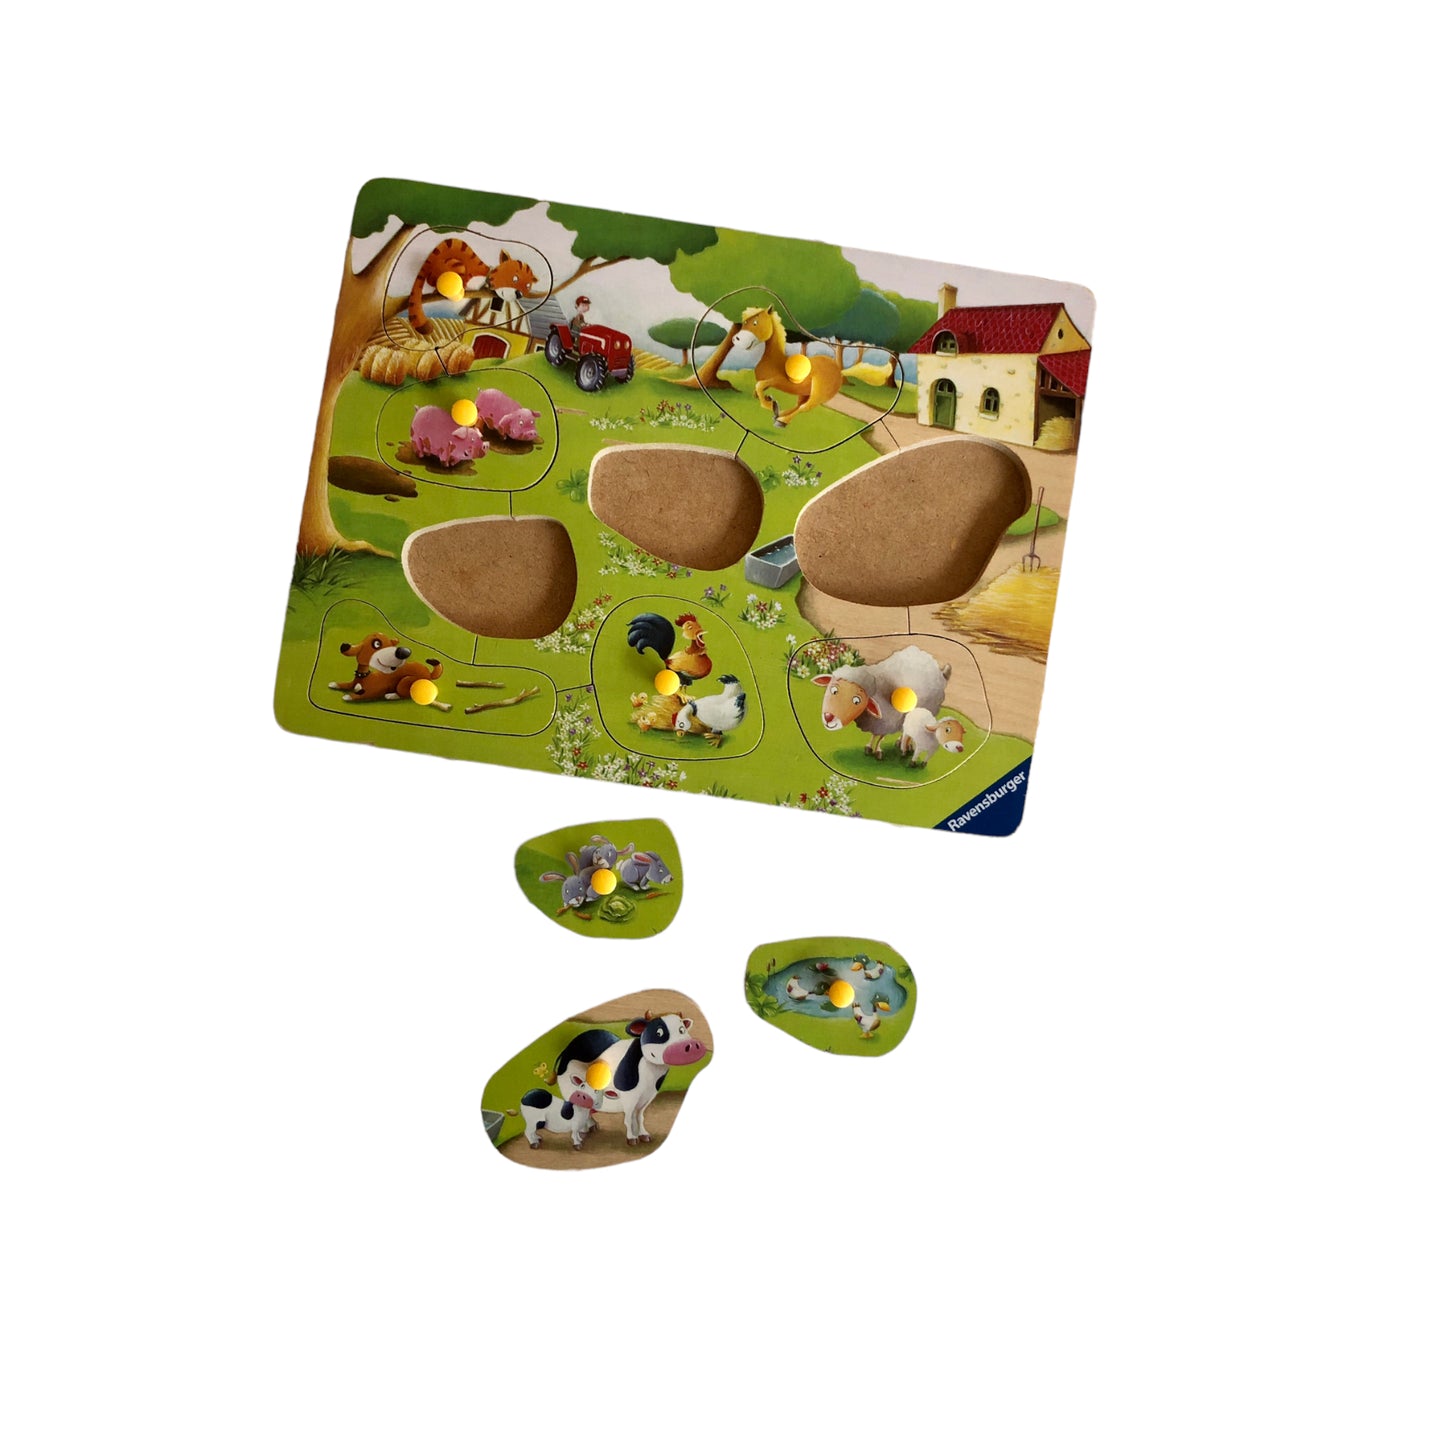 Ravensburger - Mornings on the farm - Wooden Puzzle - 9 pieces